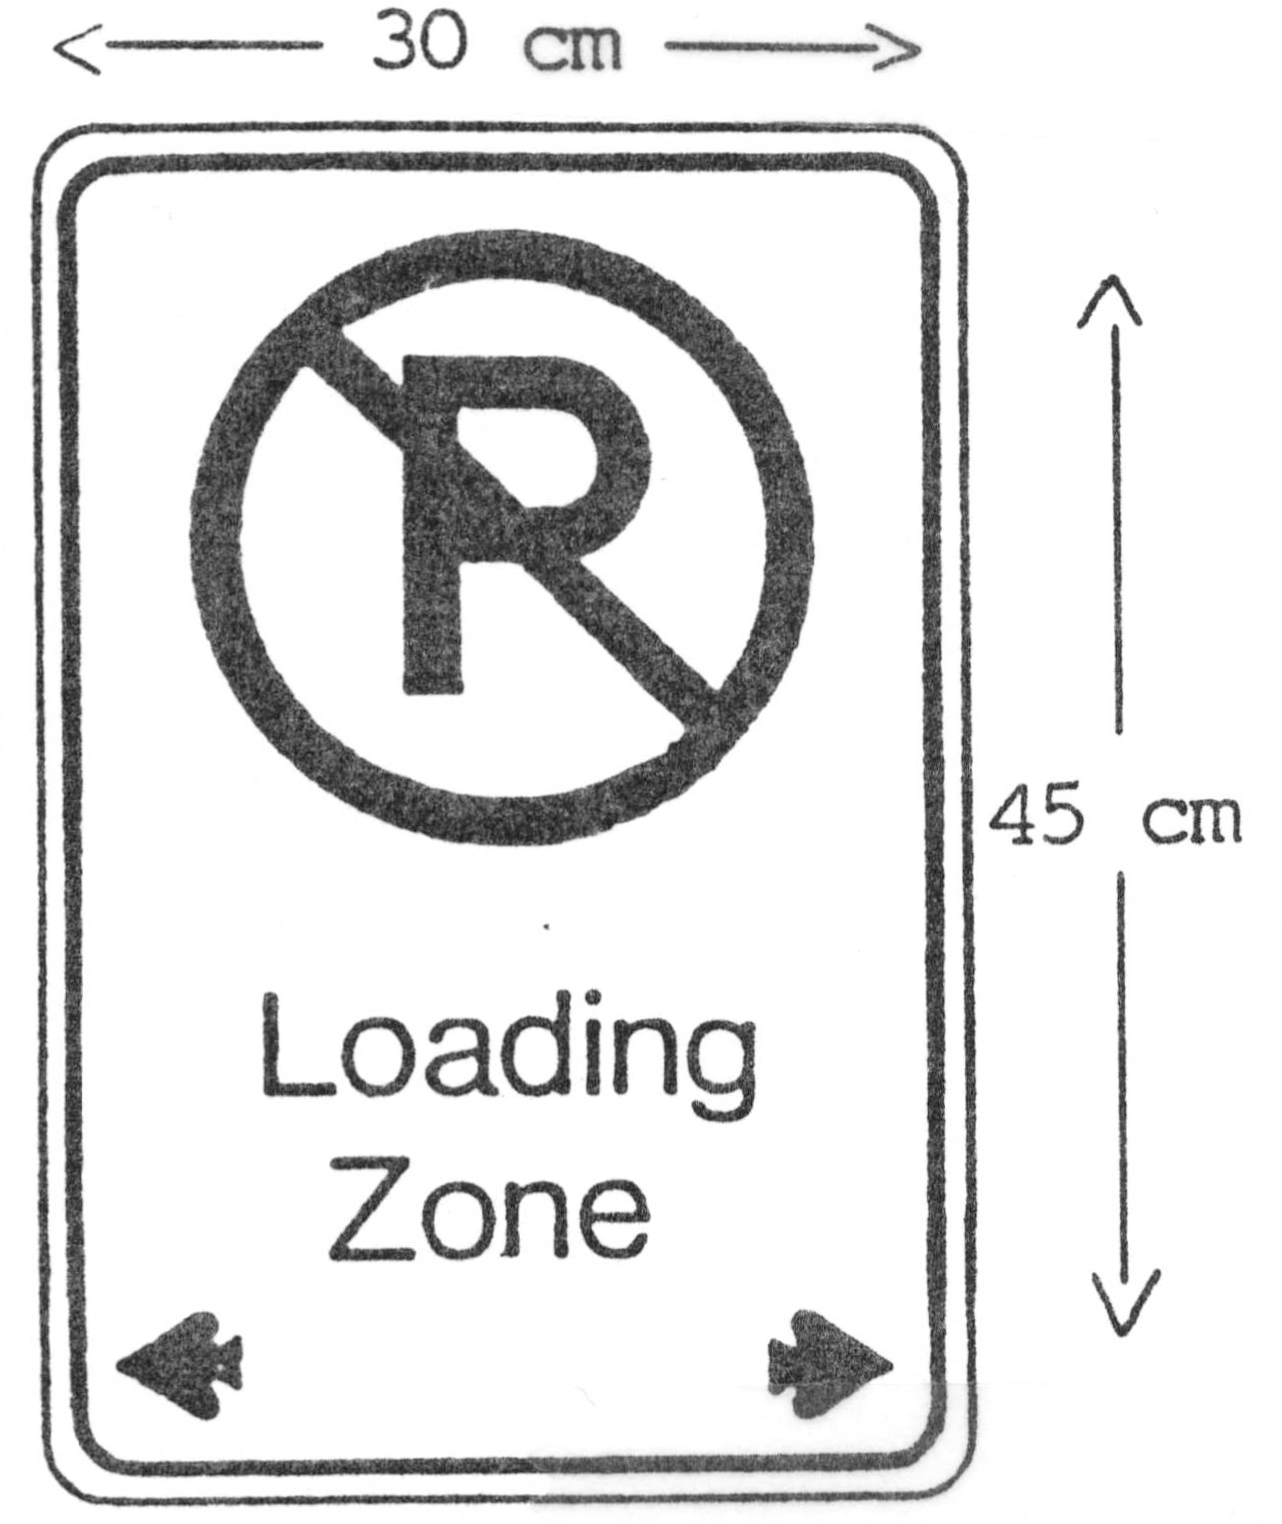 Sign: Loading Zone